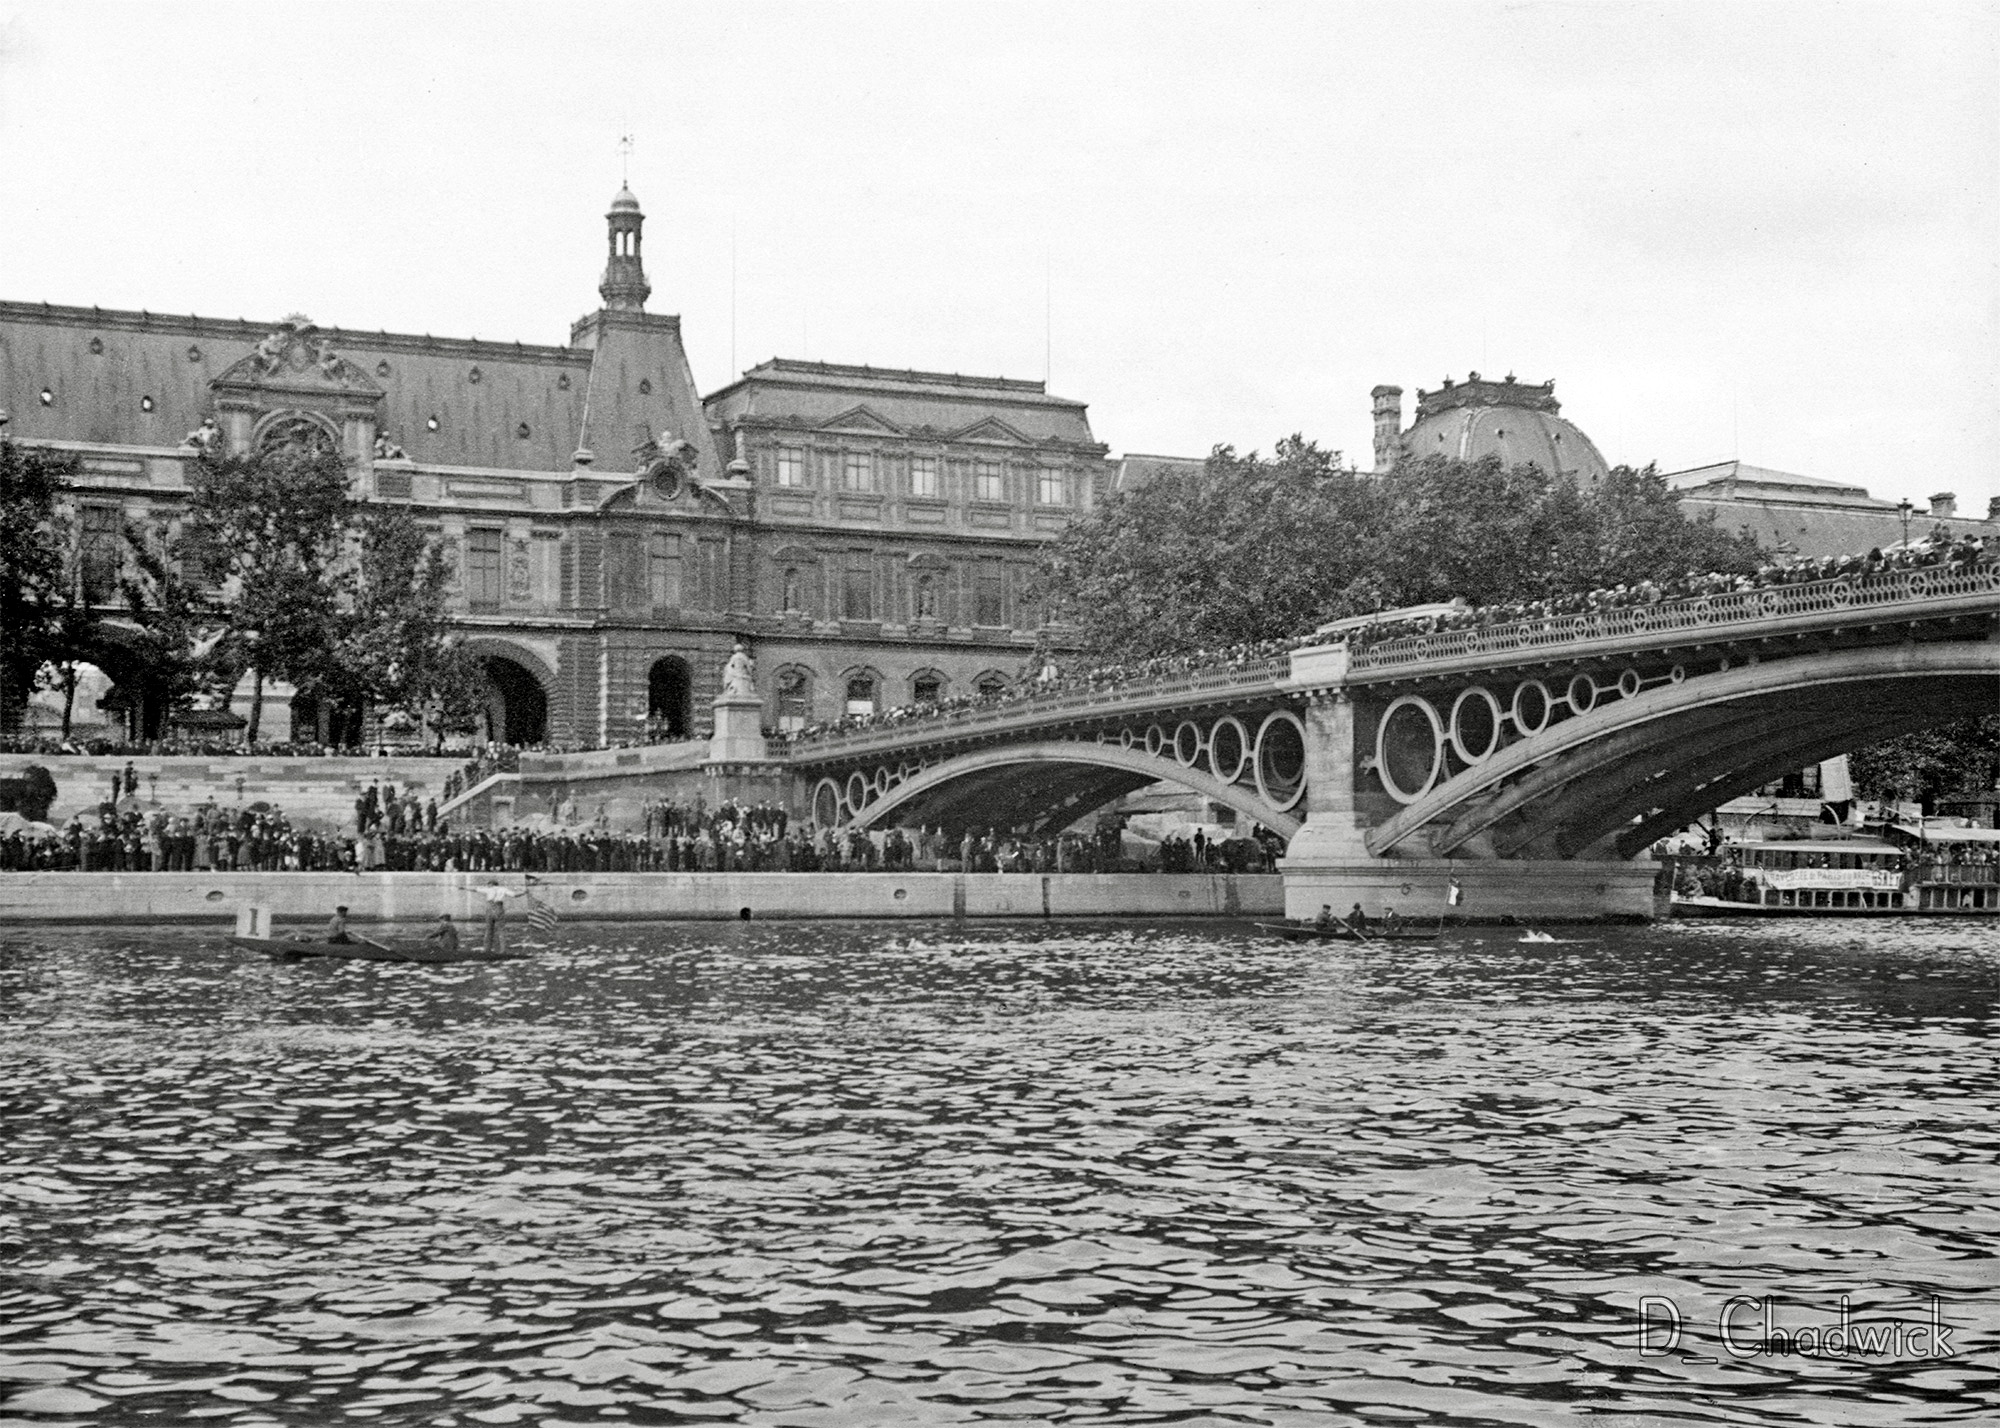 This is a photo of the 10km swim  river-race through Paris on the Seine.  It was held from 1905 to 1940.  “La Traversée de Paris” – the Paris open swim which in the early 1900s drew crowds to watch international swimmers in what was considered by spectators to be the front-crawl equivalent of cycling’s Tour de France. The building in the background is the Louvre and the bridge is the Le Pont du Carrousel which was demolished in 1930. Scanned from the original French 6x4cm glass negative. View full size.